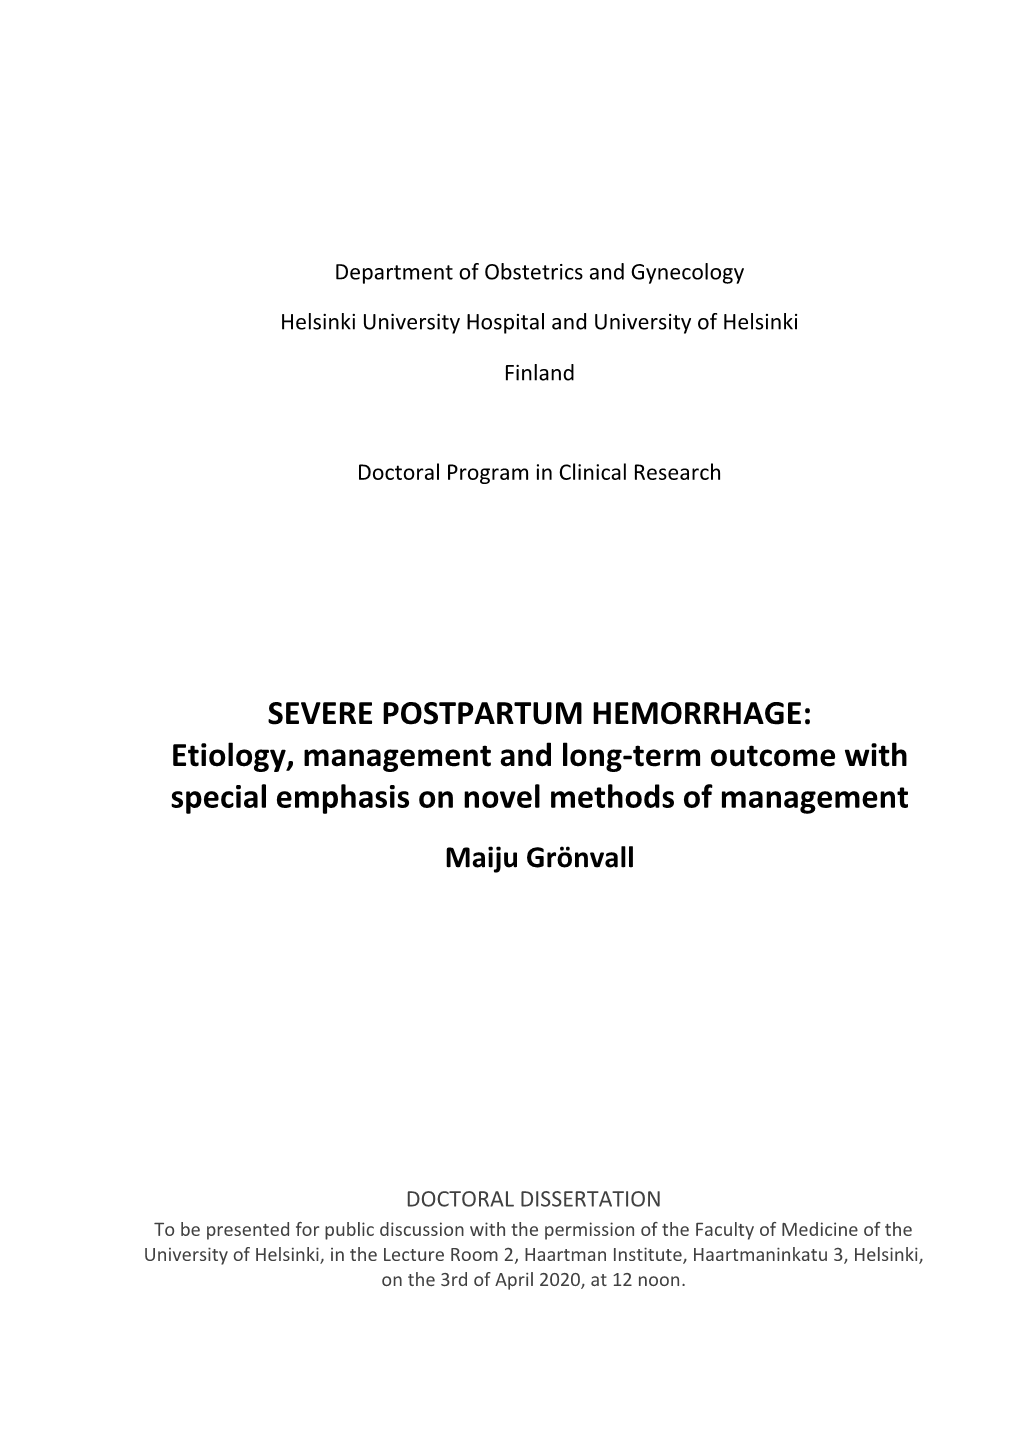 SEVERE POSTPARTUM HEMORRHAGE: Etiology, Management and Long-Term Outcome with Special Emphasis on Novel Methods of Management Maiju Grönvall